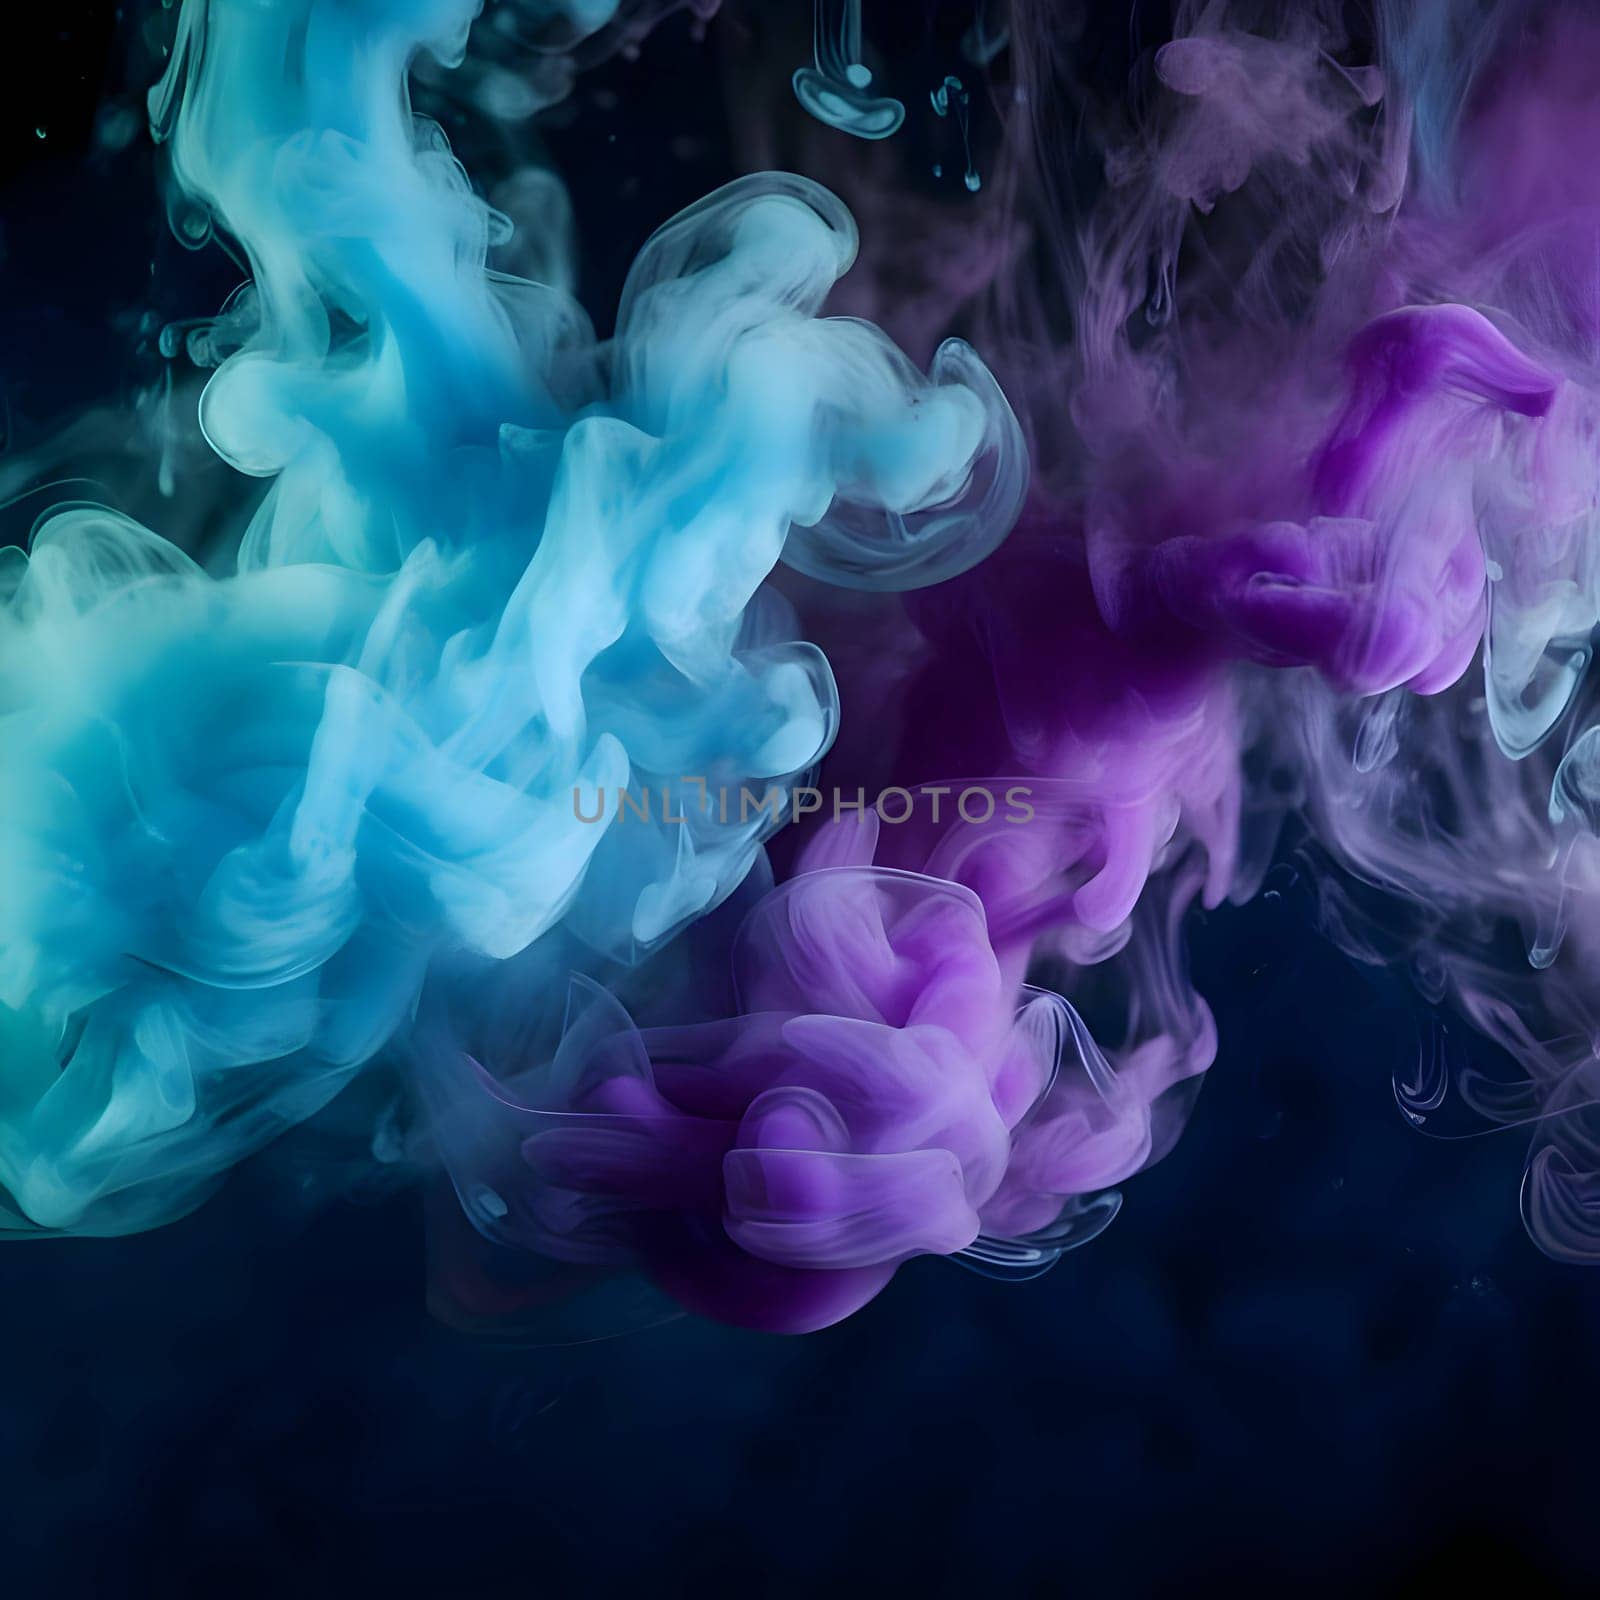 A captivating abstract background wallpaper displaying colorful clouds of smoke beneath water, against a black backdrop, creating a mesmerizing visual effect.